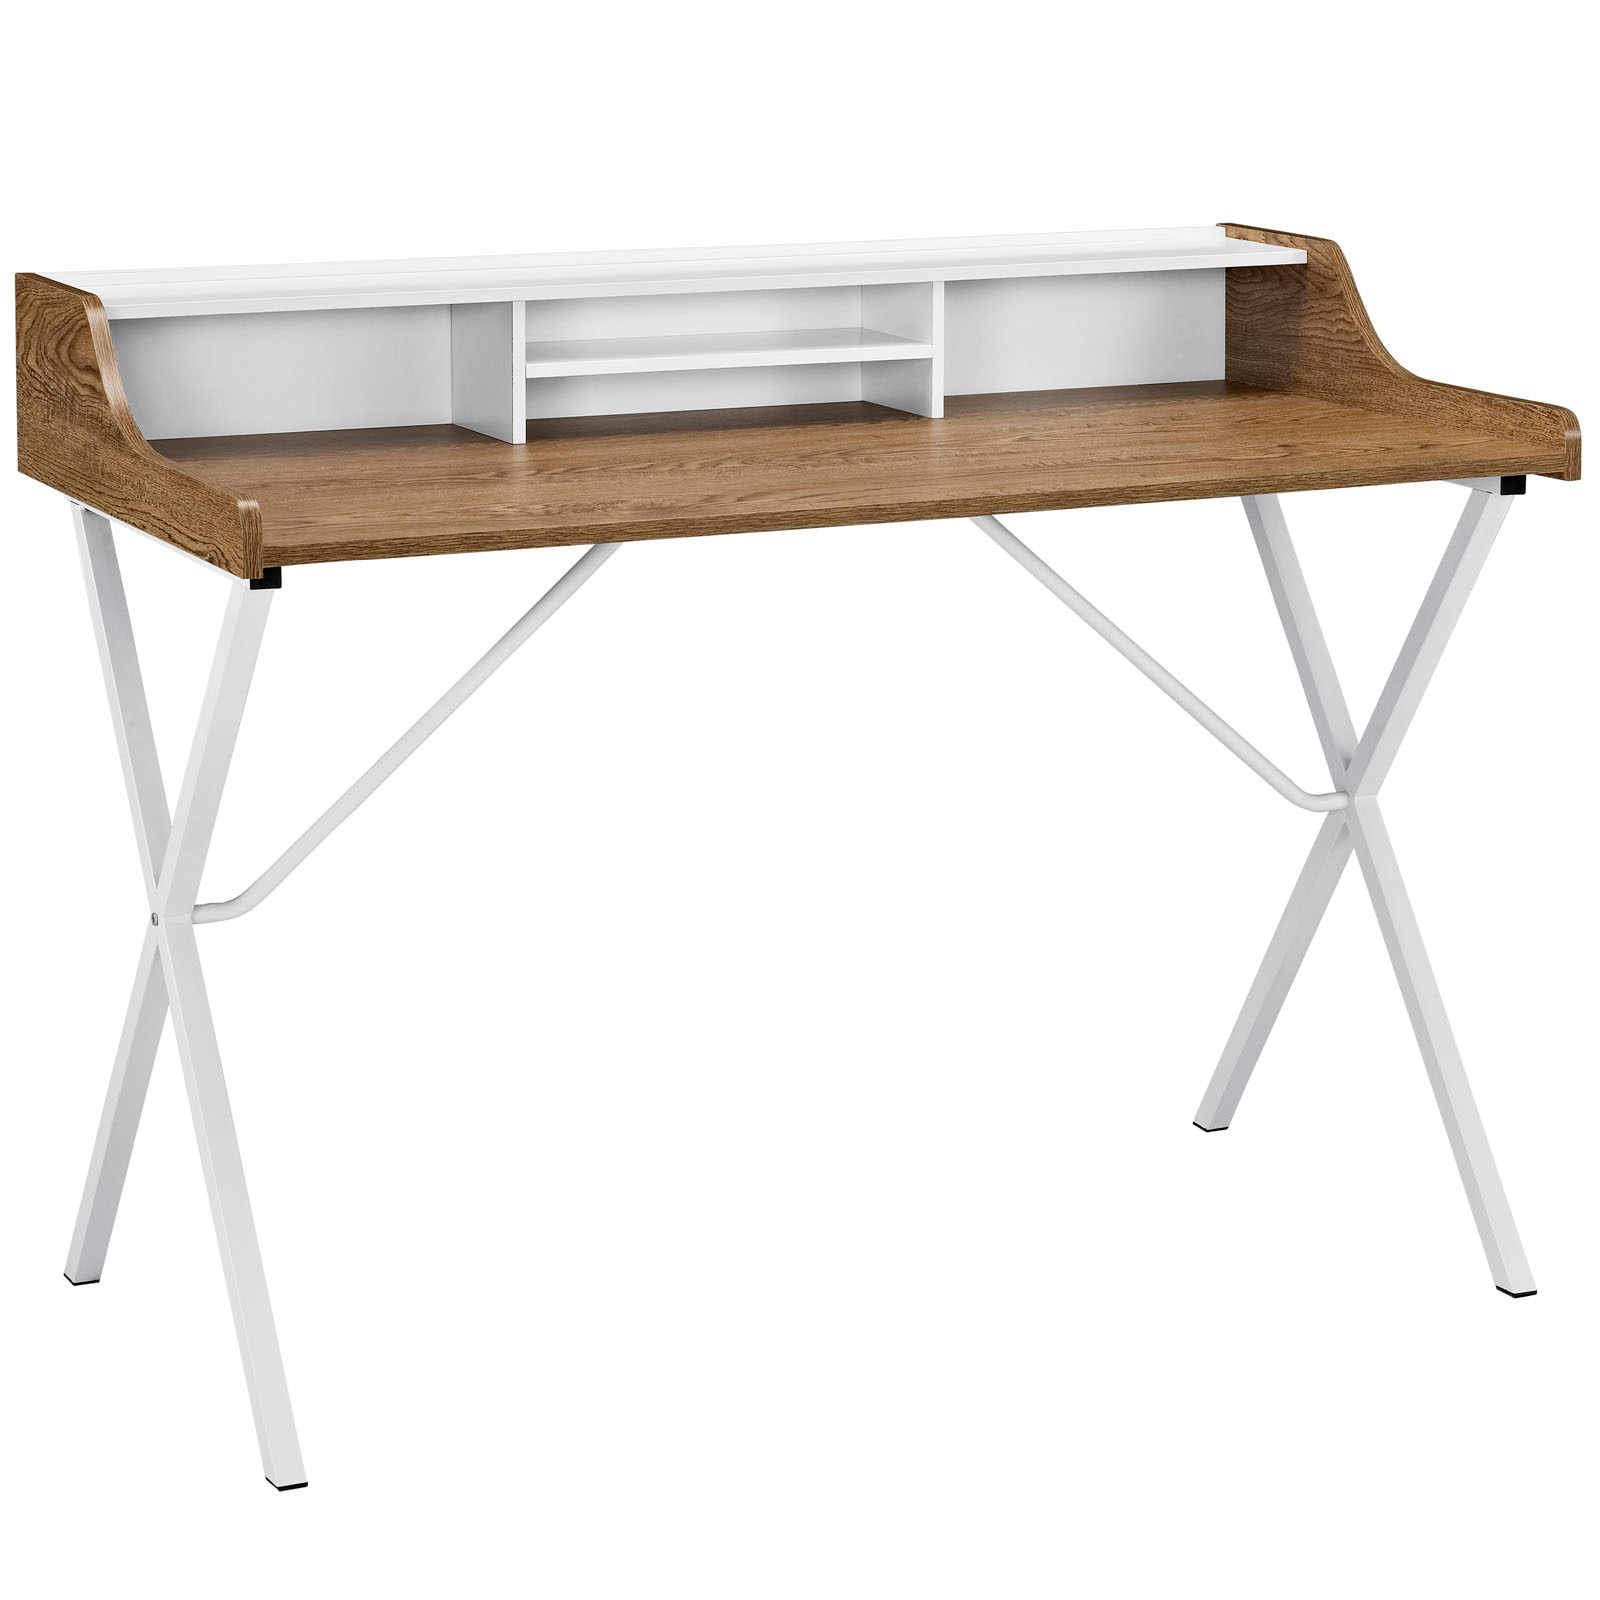 Space saving desk from Modway - Shown in Walnut (Brown)